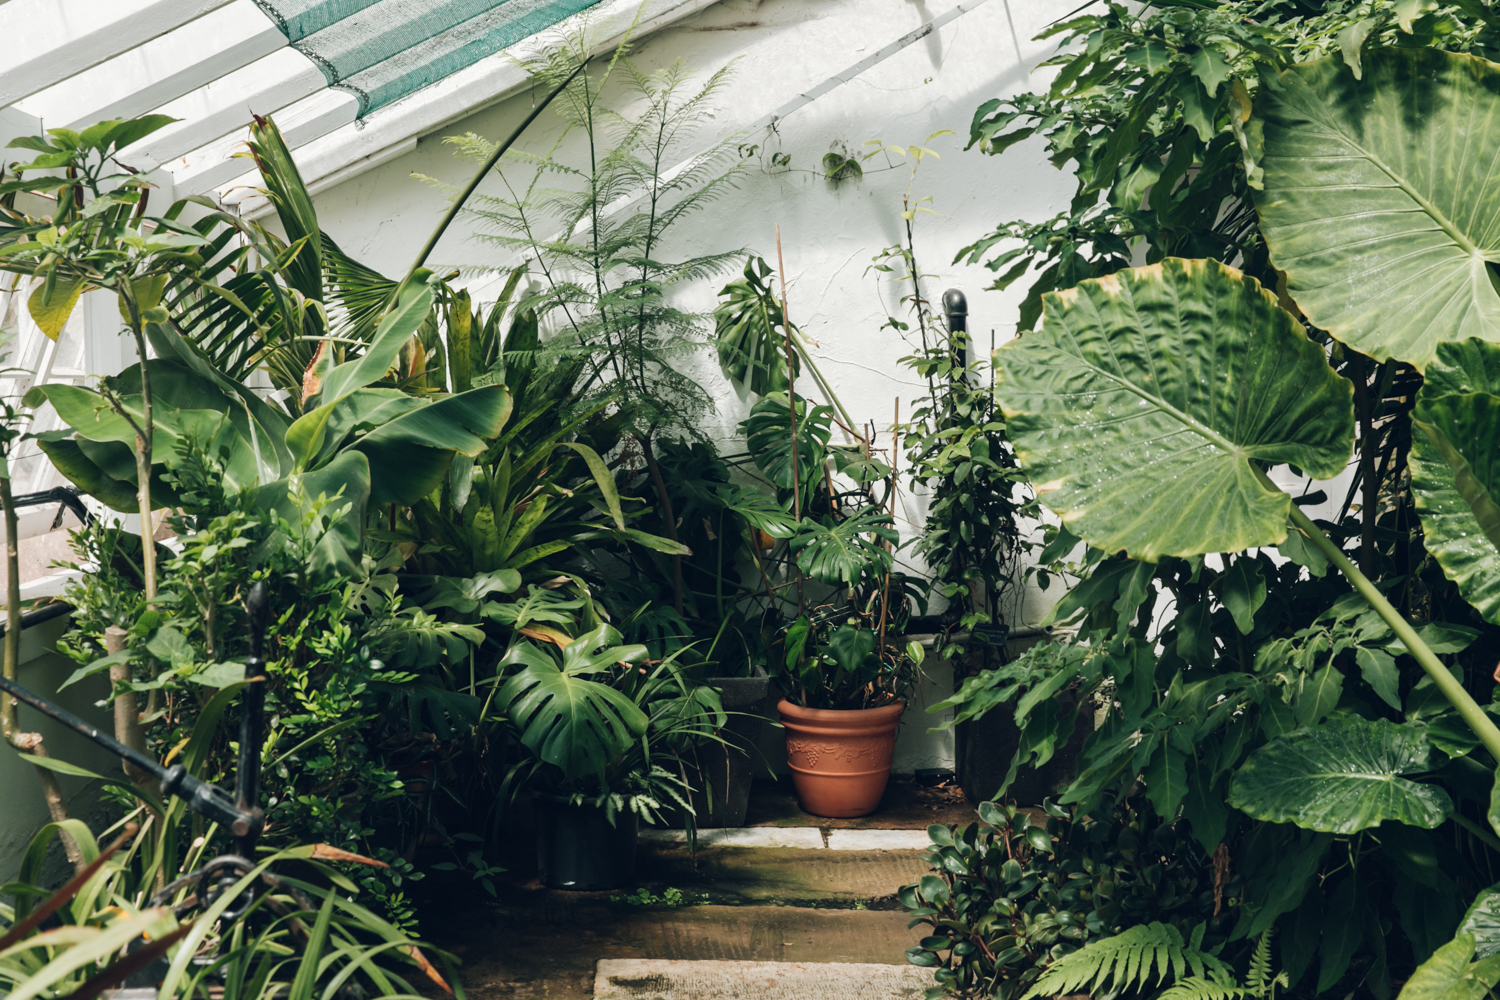 Five plant obsessed Instagram accounts to follow - 9Homes